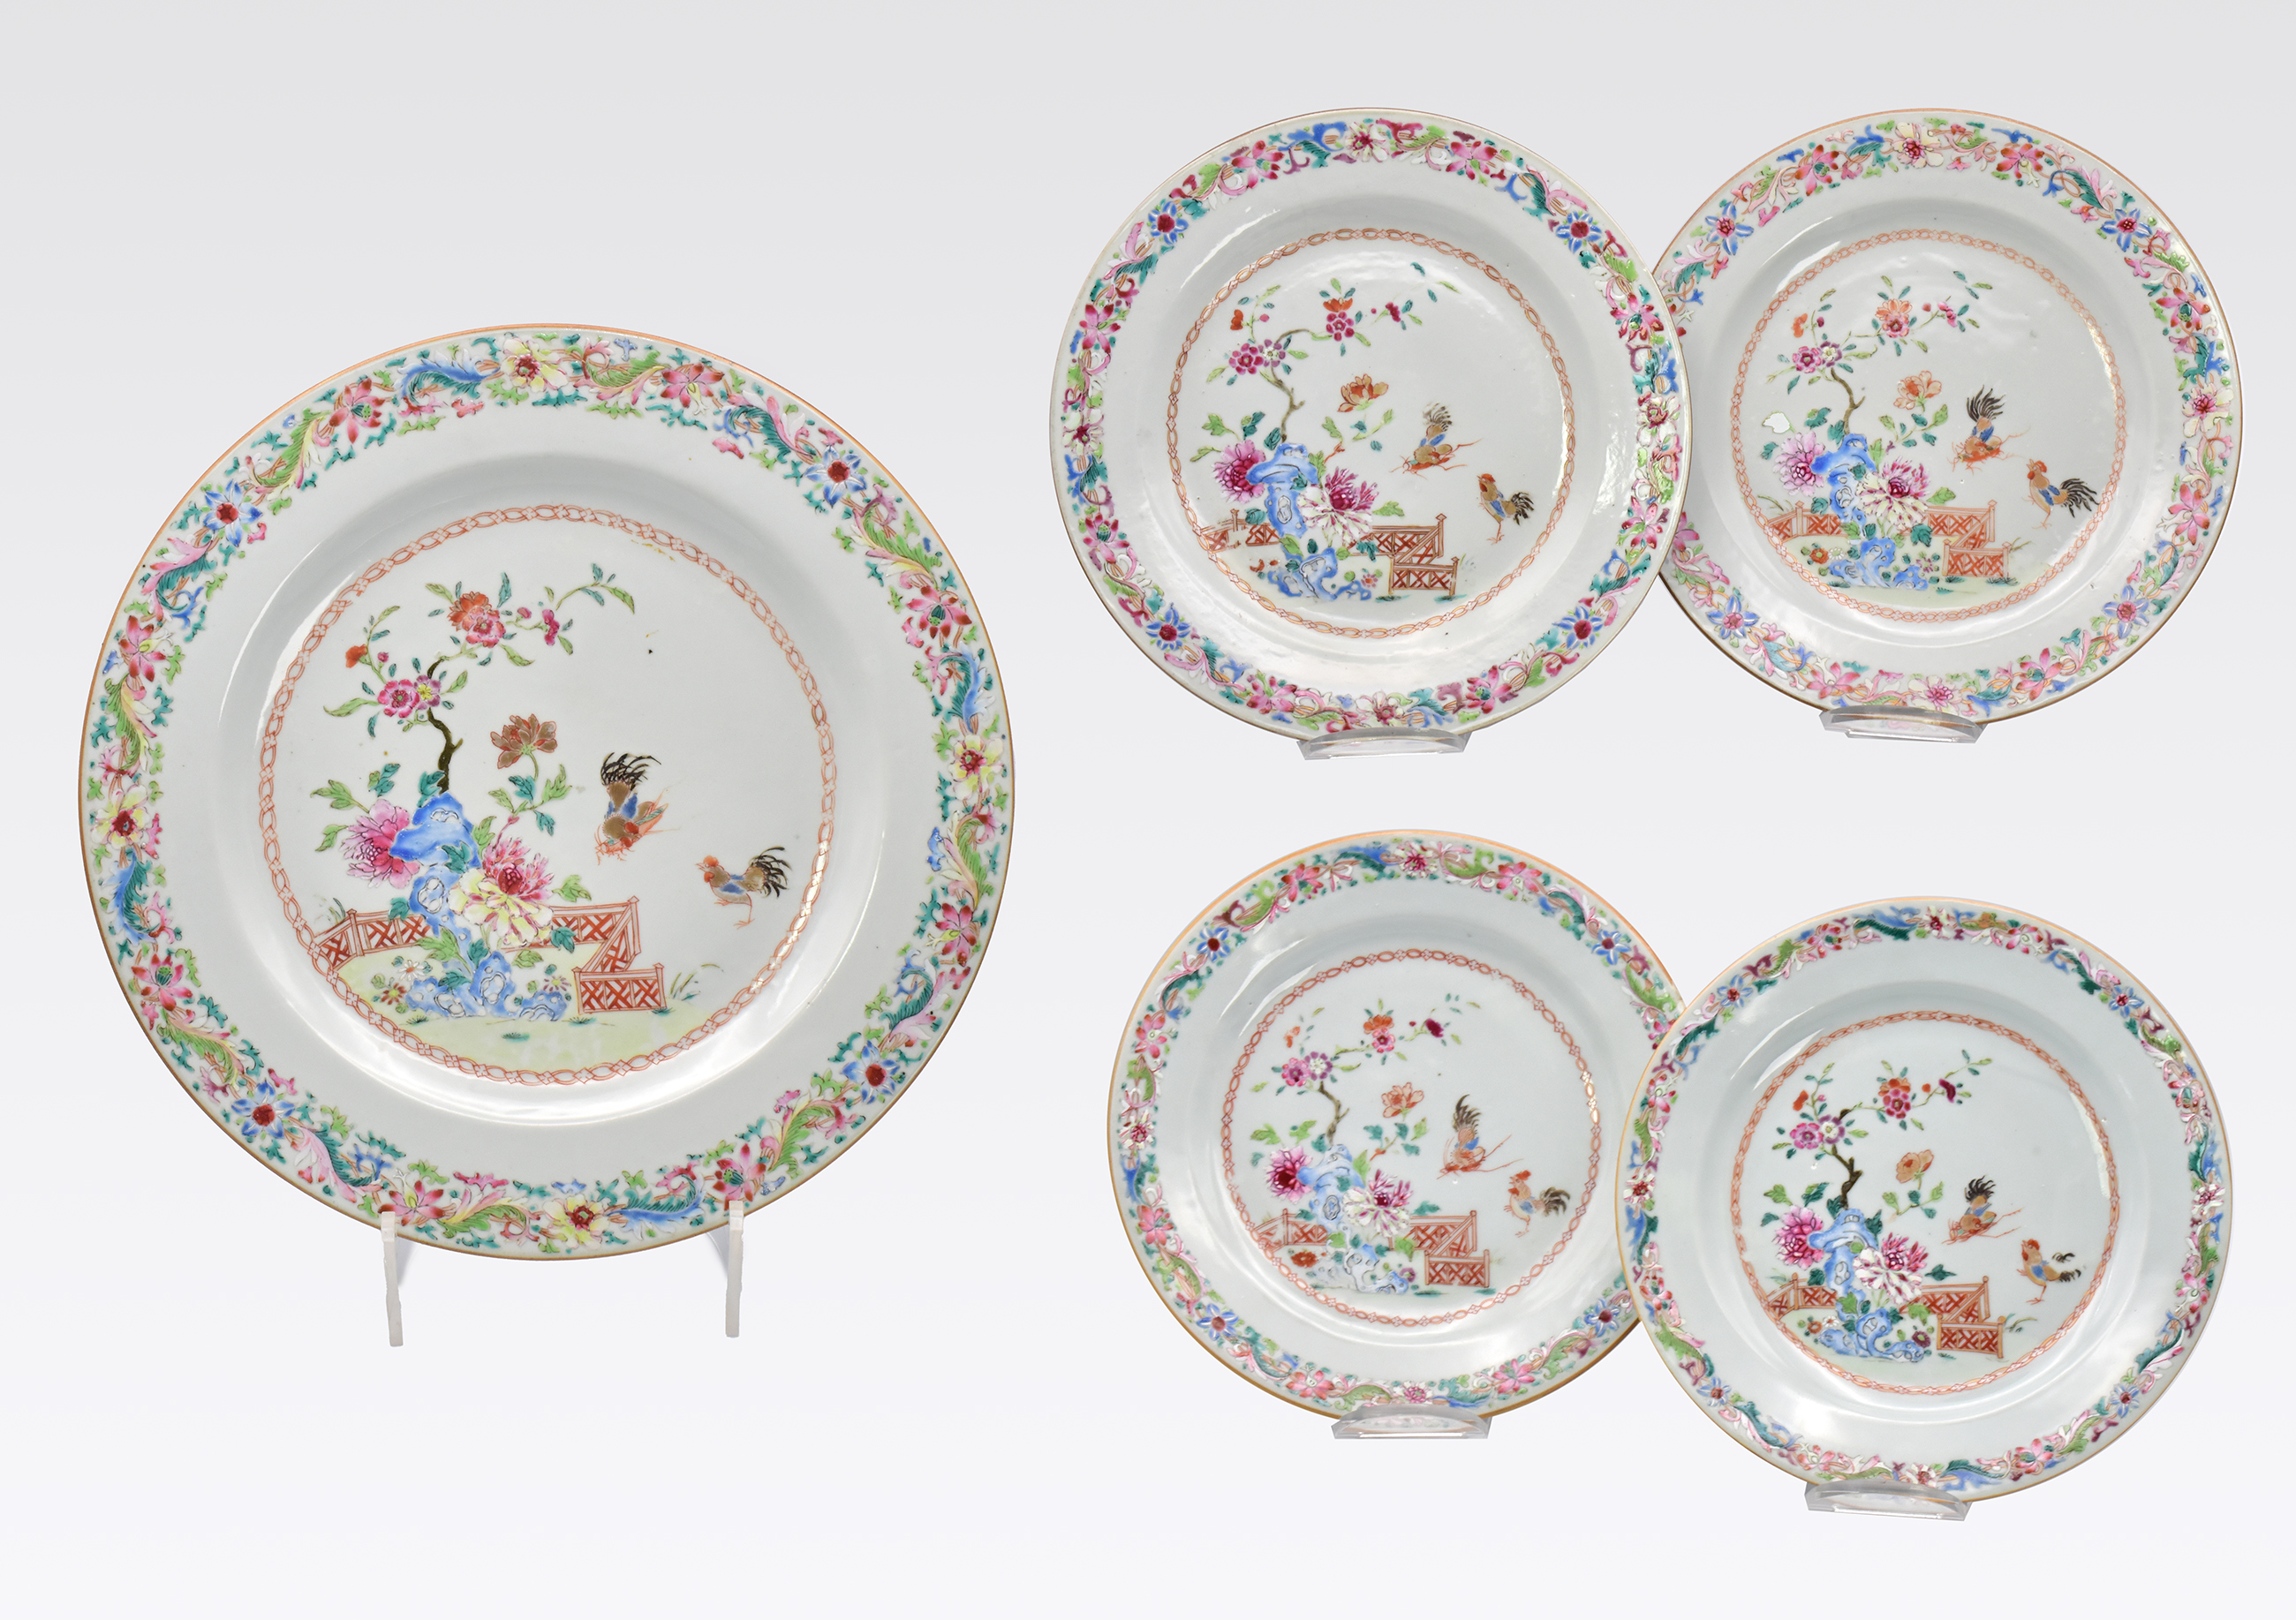 A CHINESE EXPORT ‘FAMILLE-ROSE’ PORCELAIN PART SERVICE, QING DYNASTY, QIANLONG PERIOD, 1736 – 1795